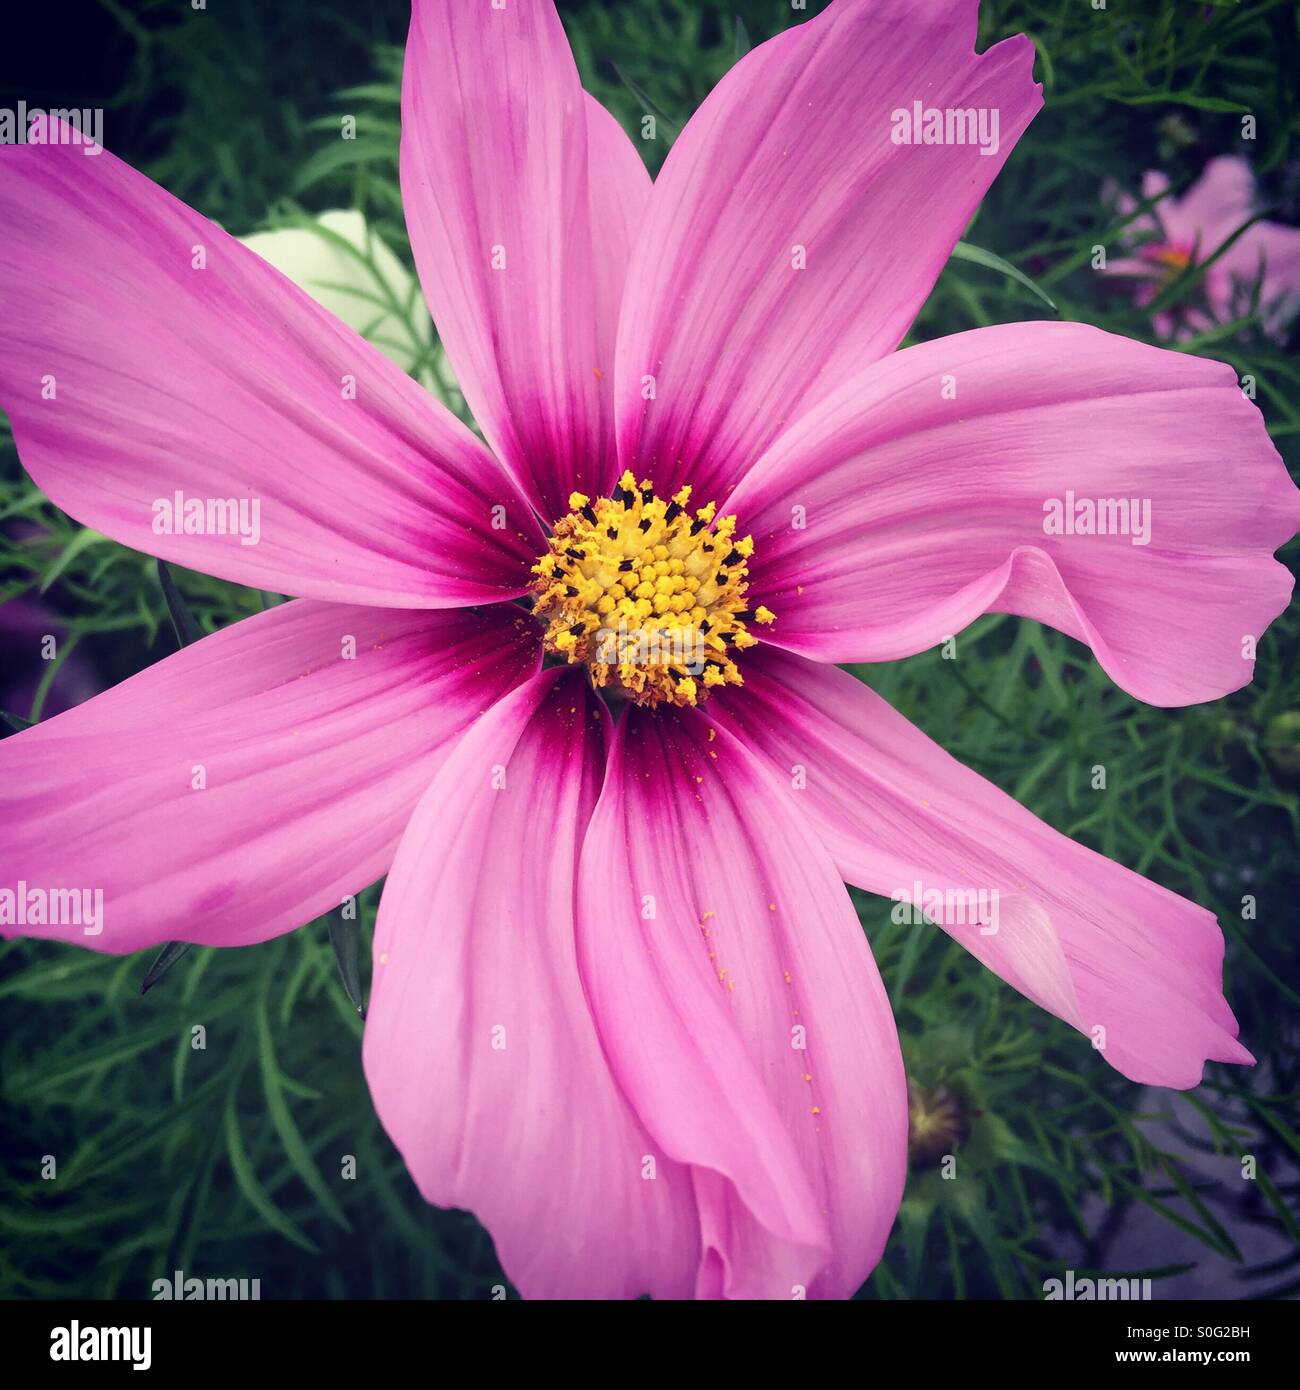 Cosmos rose flower close-up Banque D'Images